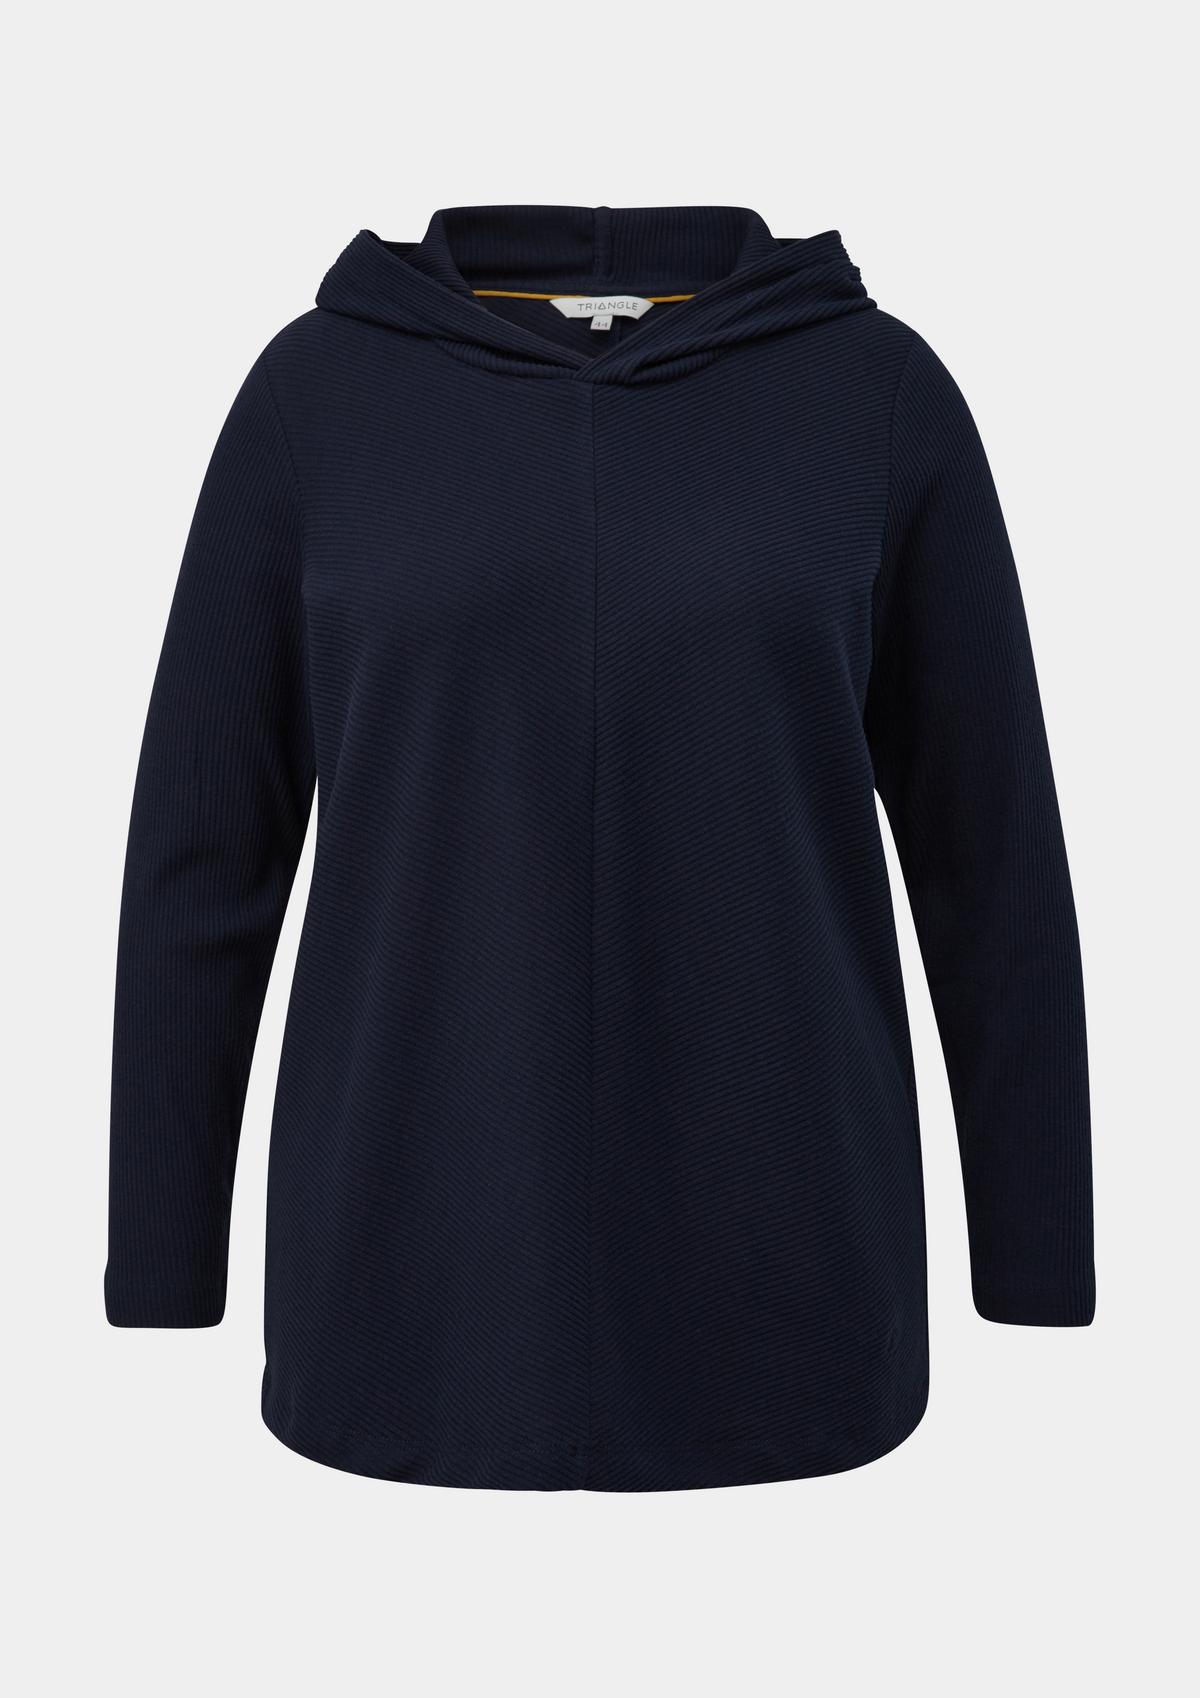 s.Oliver Hooded top with a ribbed texture